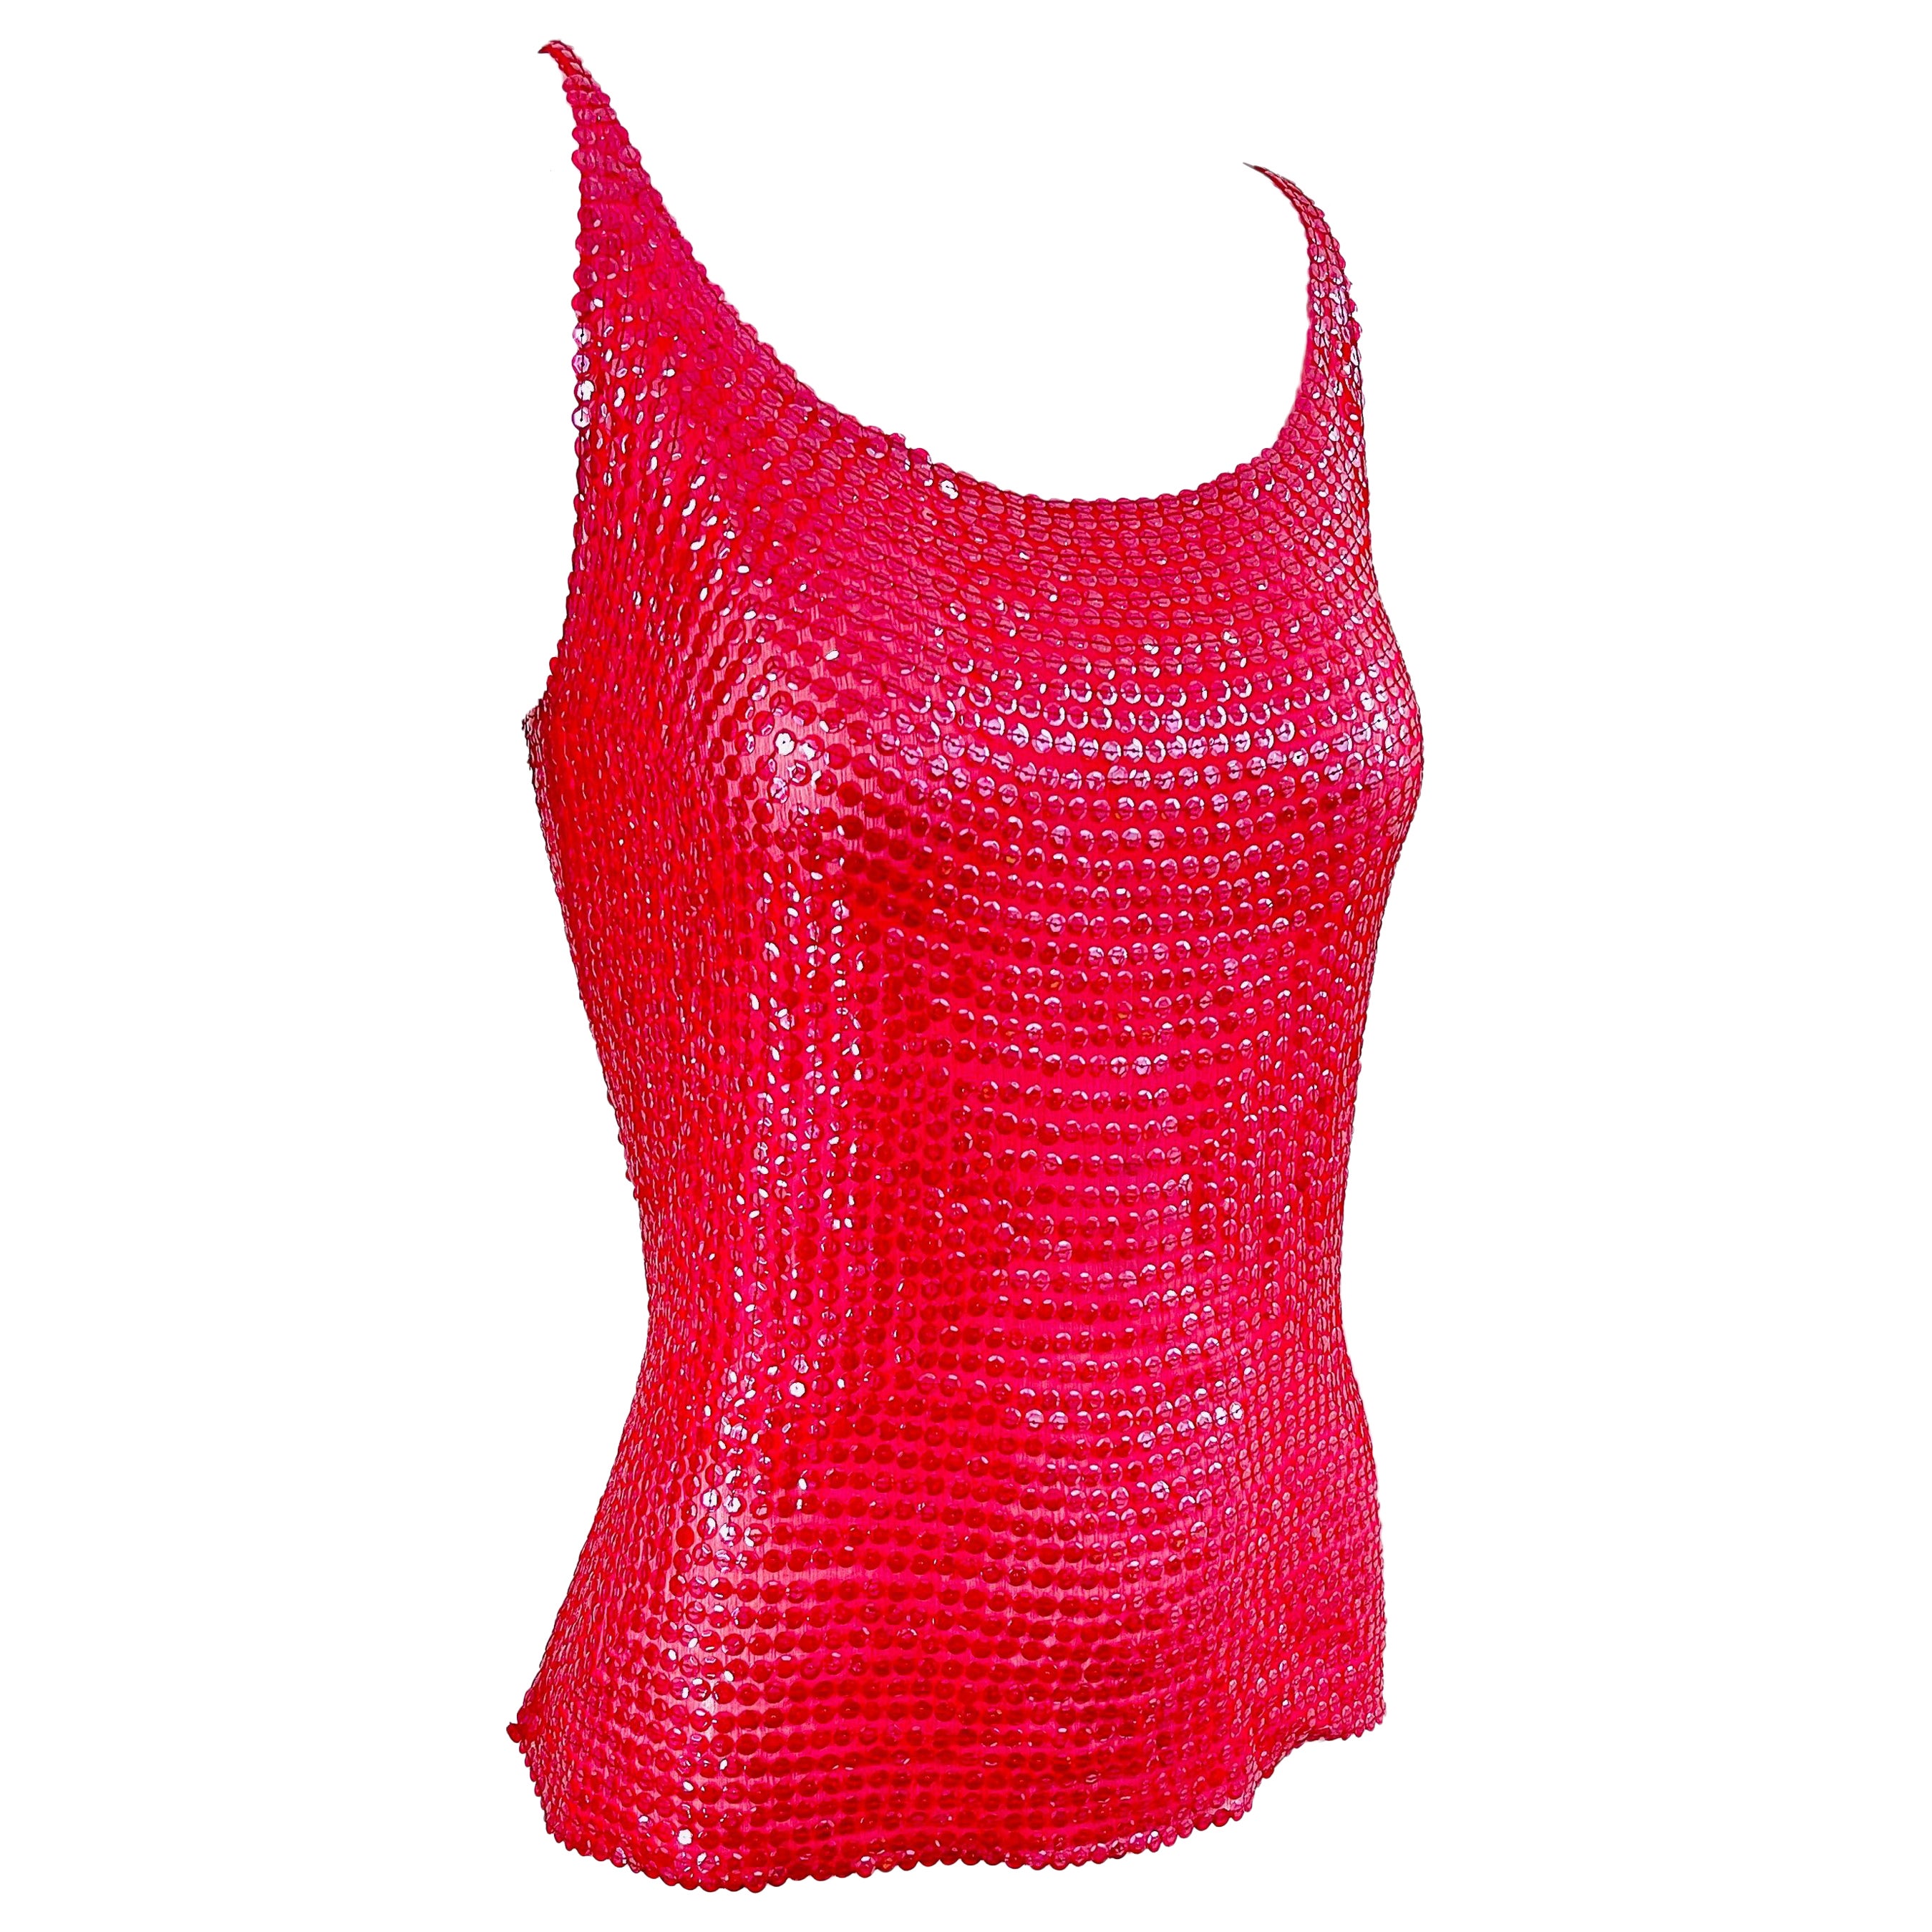 Halston 1970s Lipstick Red Silk Chiffon Fully Sequin Vintage 70s Sleeveless Top For Sale